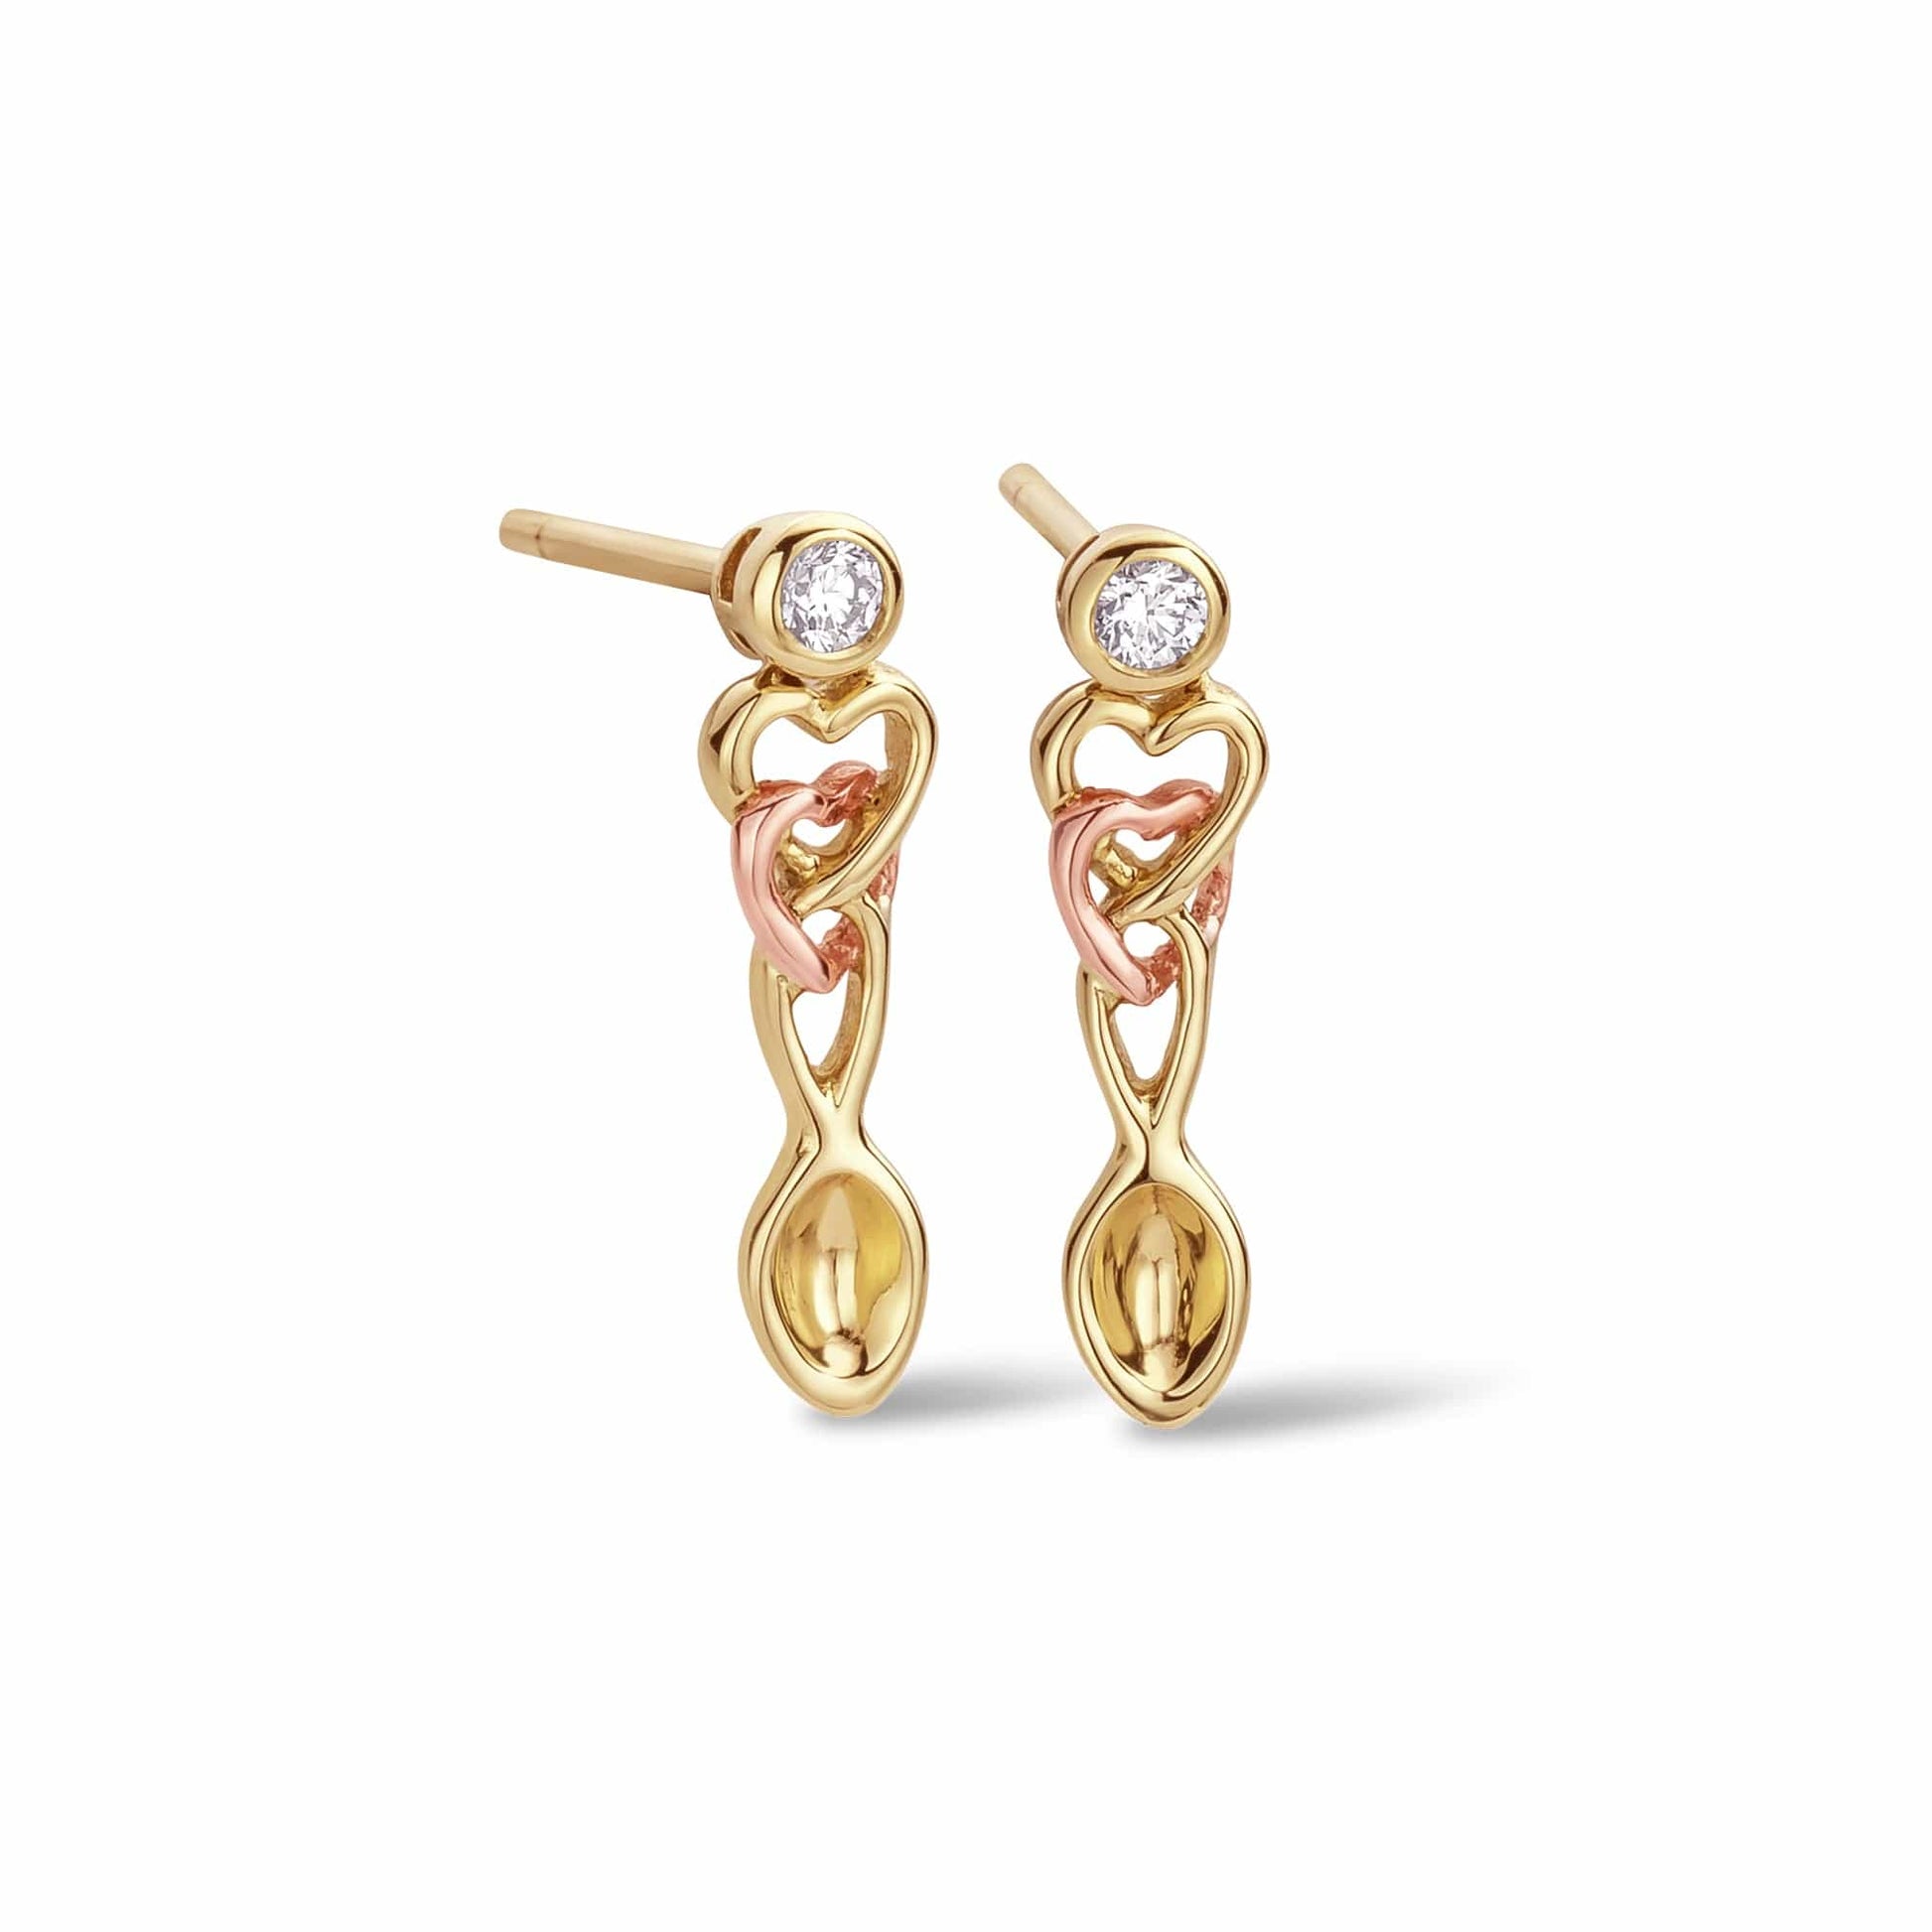 Lovespoons Gold and Diamond Drop Earrings